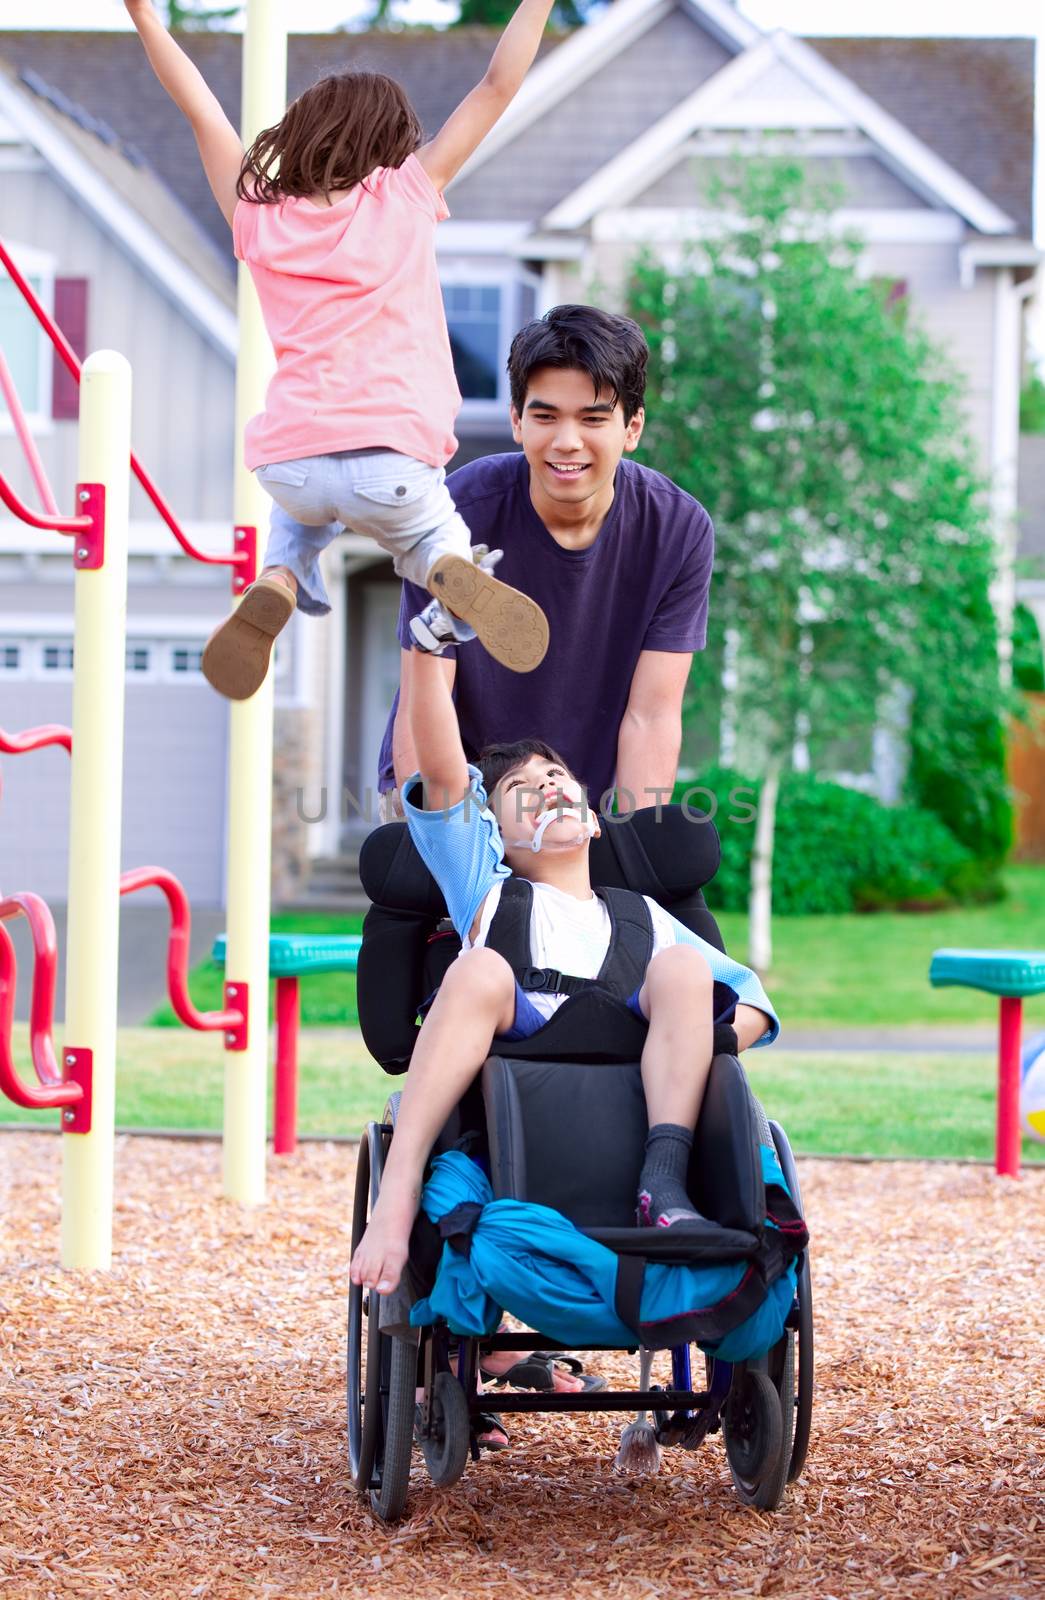 Disabled boy in wheelchair enjoying watching friends play at park on jungle gym